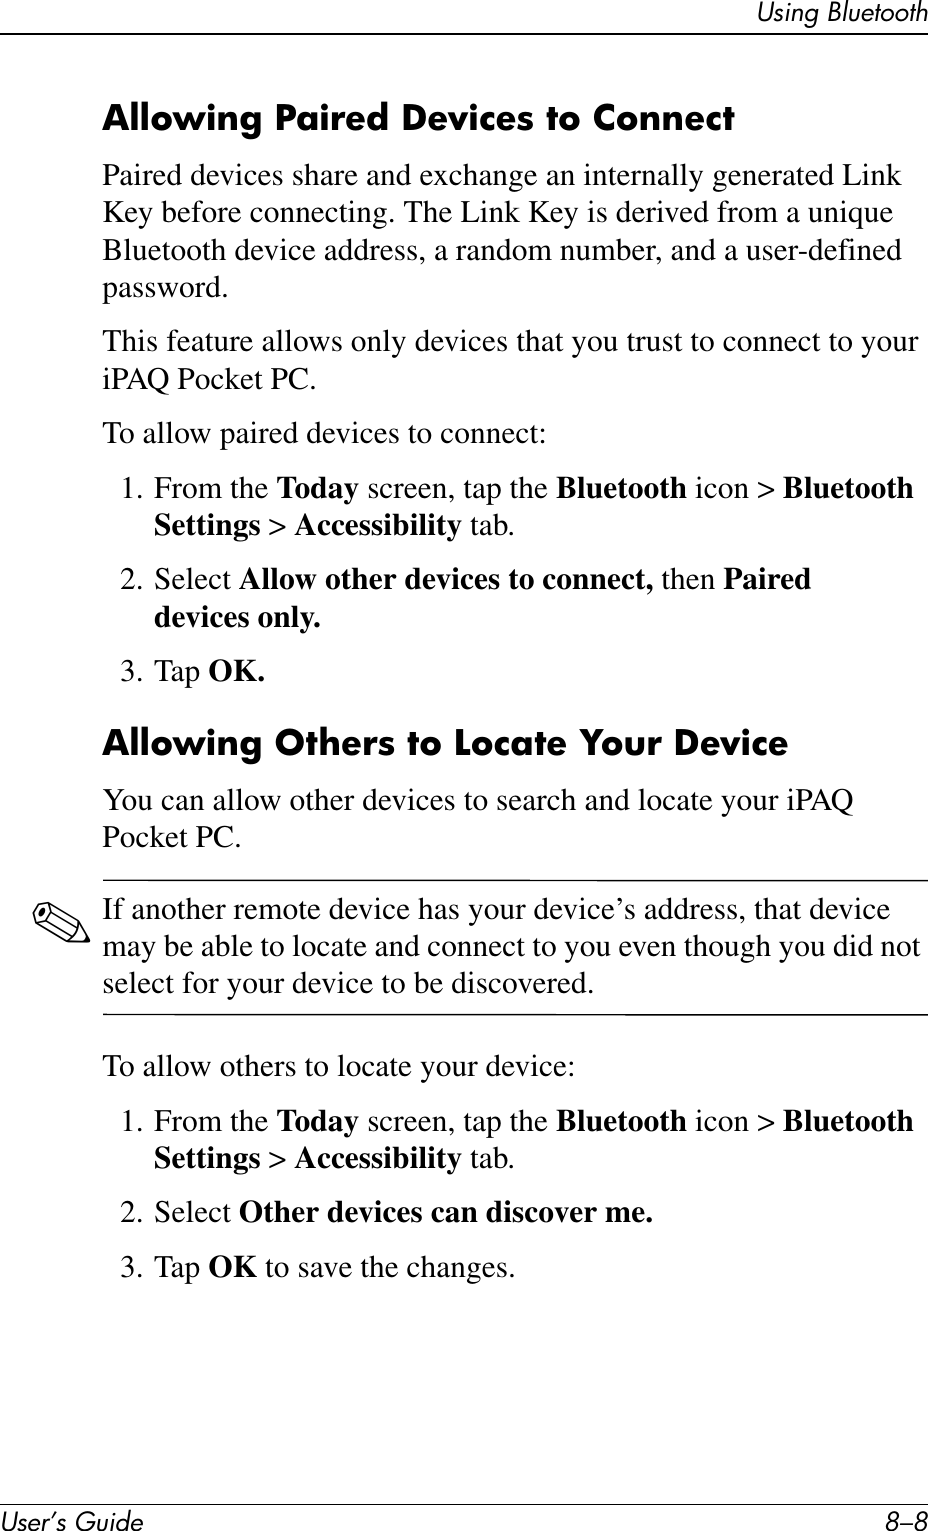 User’s Guide 8–8Using BluetoothAllowing Paired Devices to ConnectPaired devices share and exchange an internally generated Link Key before connecting. The Link Key is derived from a unique Bluetooth device address, a random number, and a user-defined password.This feature allows only devices that you trust to connect to your iPAQ Pocket PC.To allow paired devices to connect:1. From the Today screen, tap the Bluetooth icon &gt; Bluetooth Settings &gt; Accessibility tab.2. Select Allow other devices to connect, then Paired devices only.3. Tap OK.Allowing Others to Locate Your DeviceYou can allow other devices to search and locate your iPAQ Pocket PC.✎If another remote device has your device’s address, that device may be able to locate and connect to you even though you did not select for your device to be discovered.To allow others to locate your device:1. From the Today screen, tap the Bluetooth icon &gt; Bluetooth Settings &gt; Accessibility tab.2. Select Other devices can discover me.3. Tap OK to save the changes.